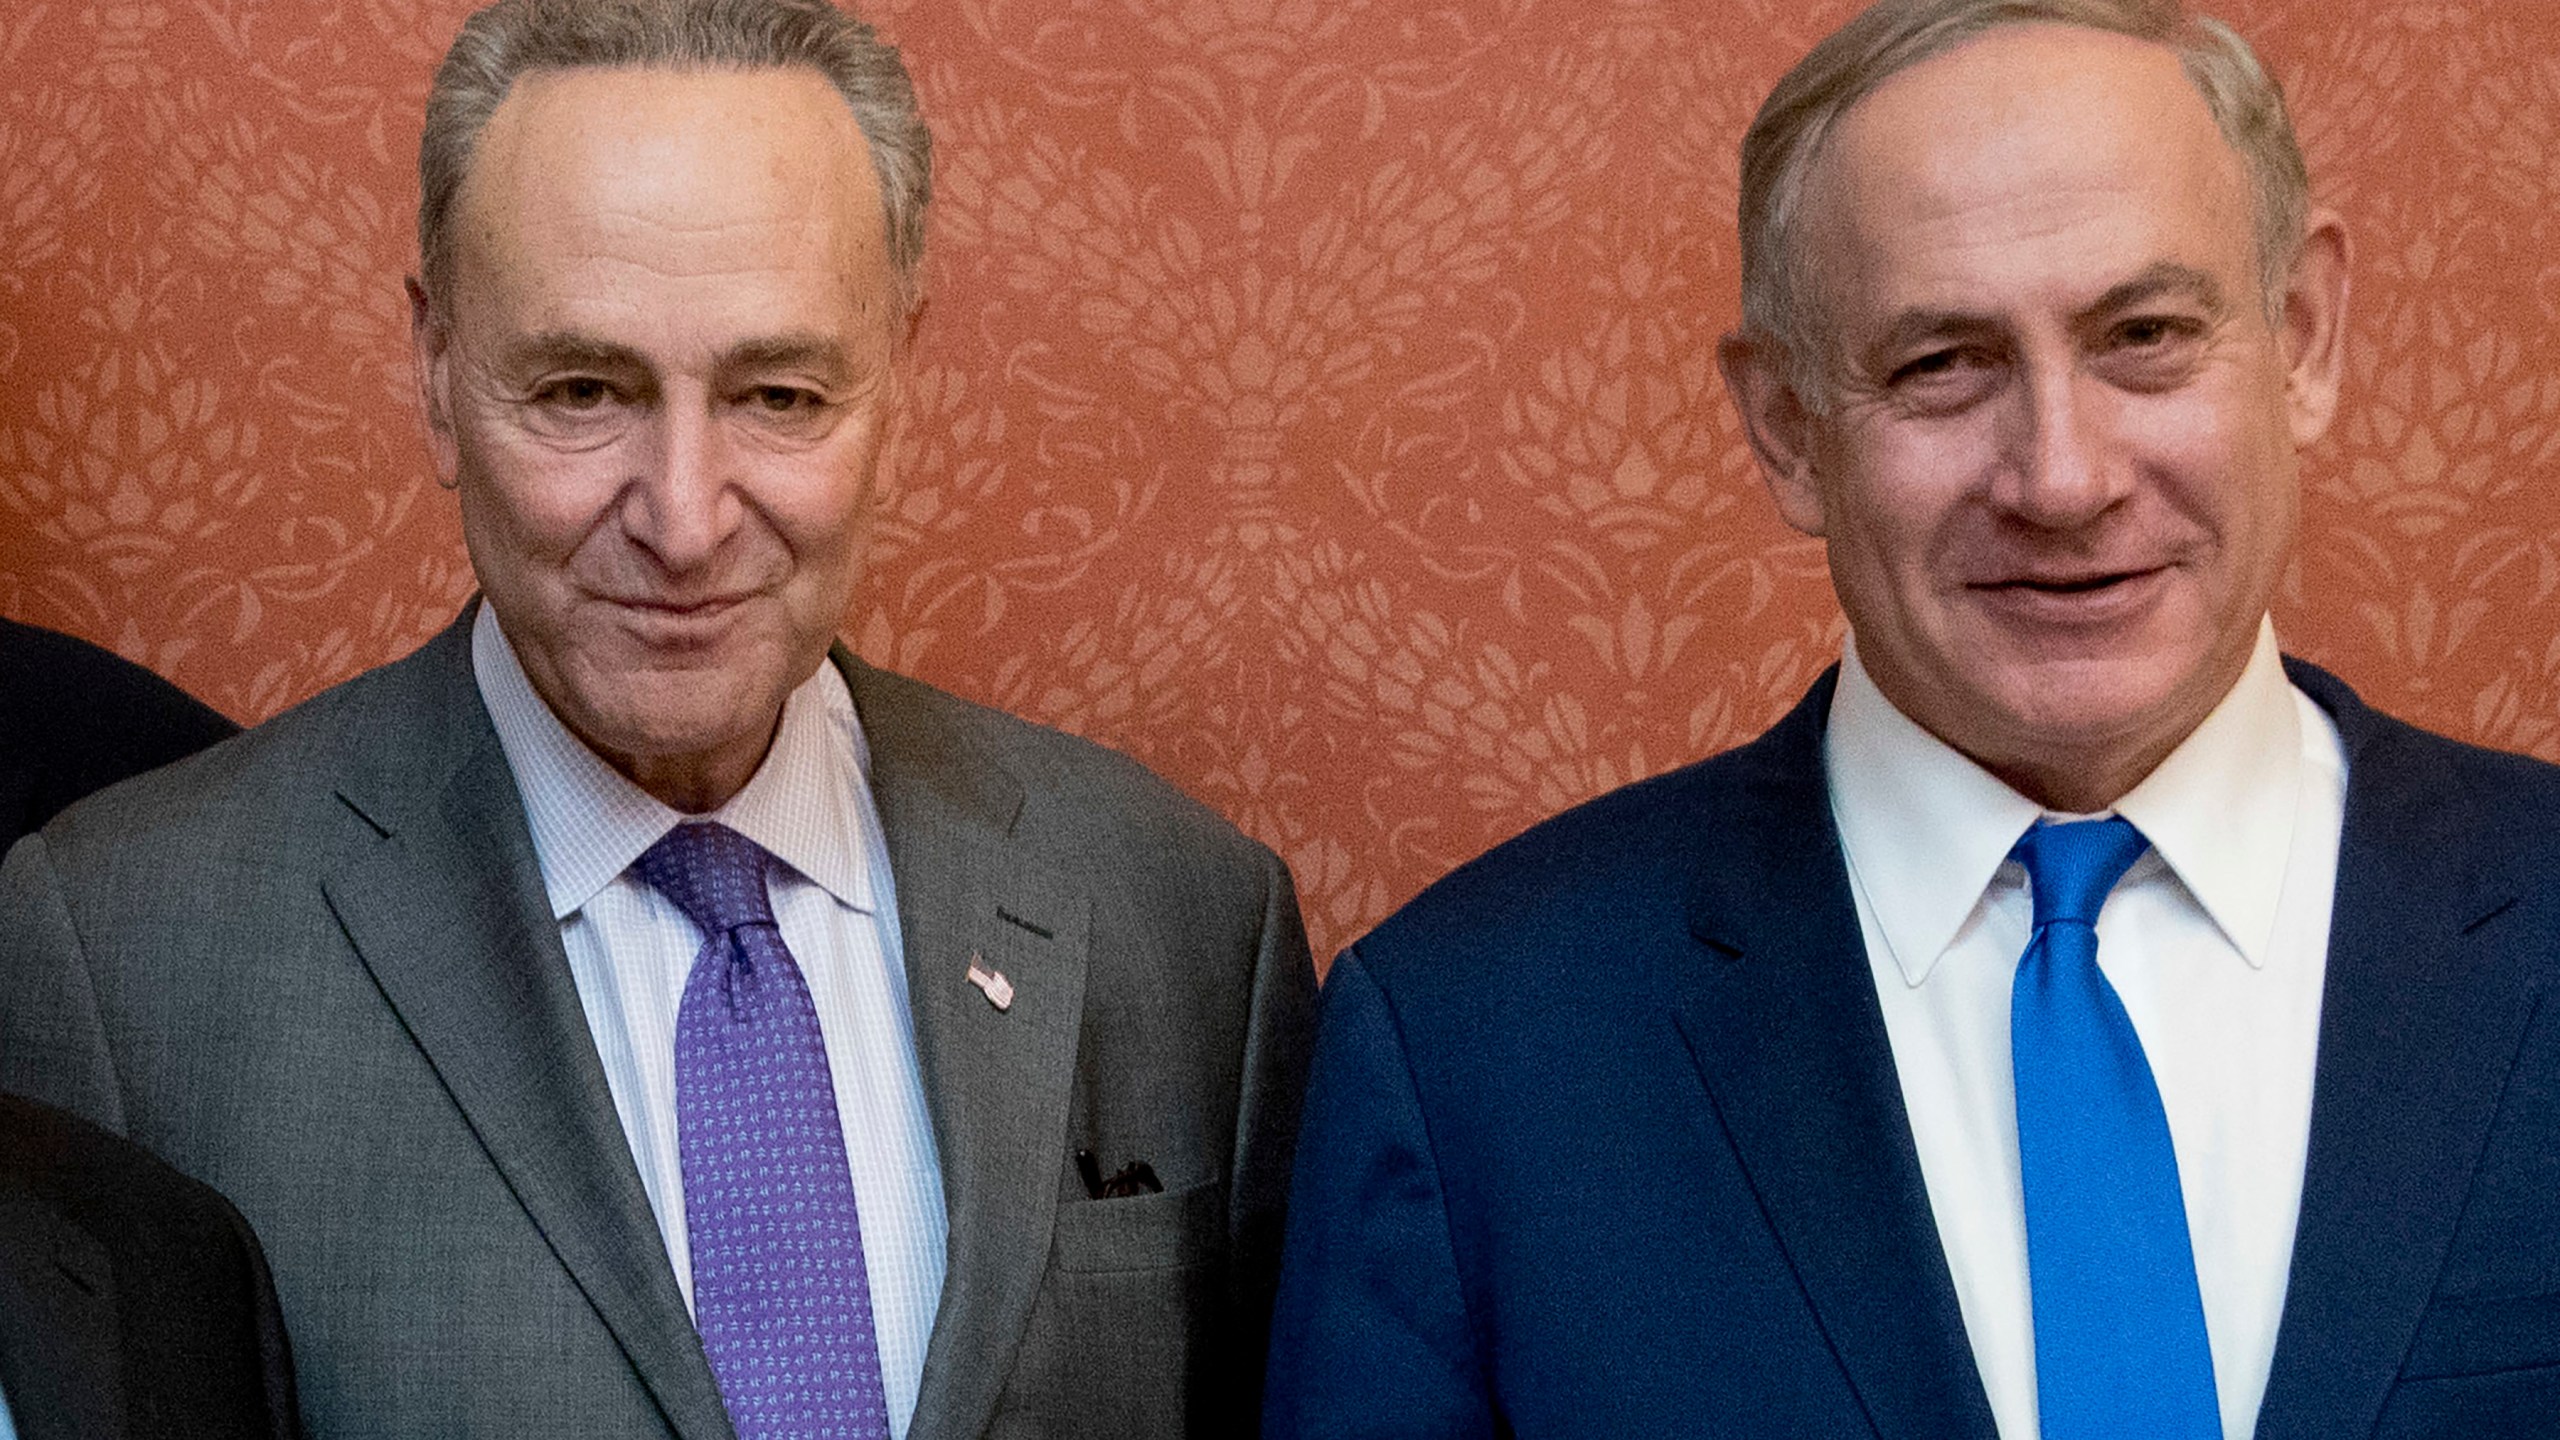 FILE - Israeli Prime Minister Benjamin Netanyahu, right, poses for a picture with Senate Minority Leader Chuck Schumer of New York, on Capitol Hill in Washington, Feb. 15, 2017. Schumer is calling on Israel to hold new elections. Schumer says he believes Israeli Prime Minister Benjamin Netanyahu has “lost his way” amid the Israeli bombardment of Gaza and a growing humanitarian crisis there. Schumer is the first Jewish majority leader in the Senate and the highest-ranking Jewish official in the U.S.. (AP Photo/Manuel Balce Ceneta, File)